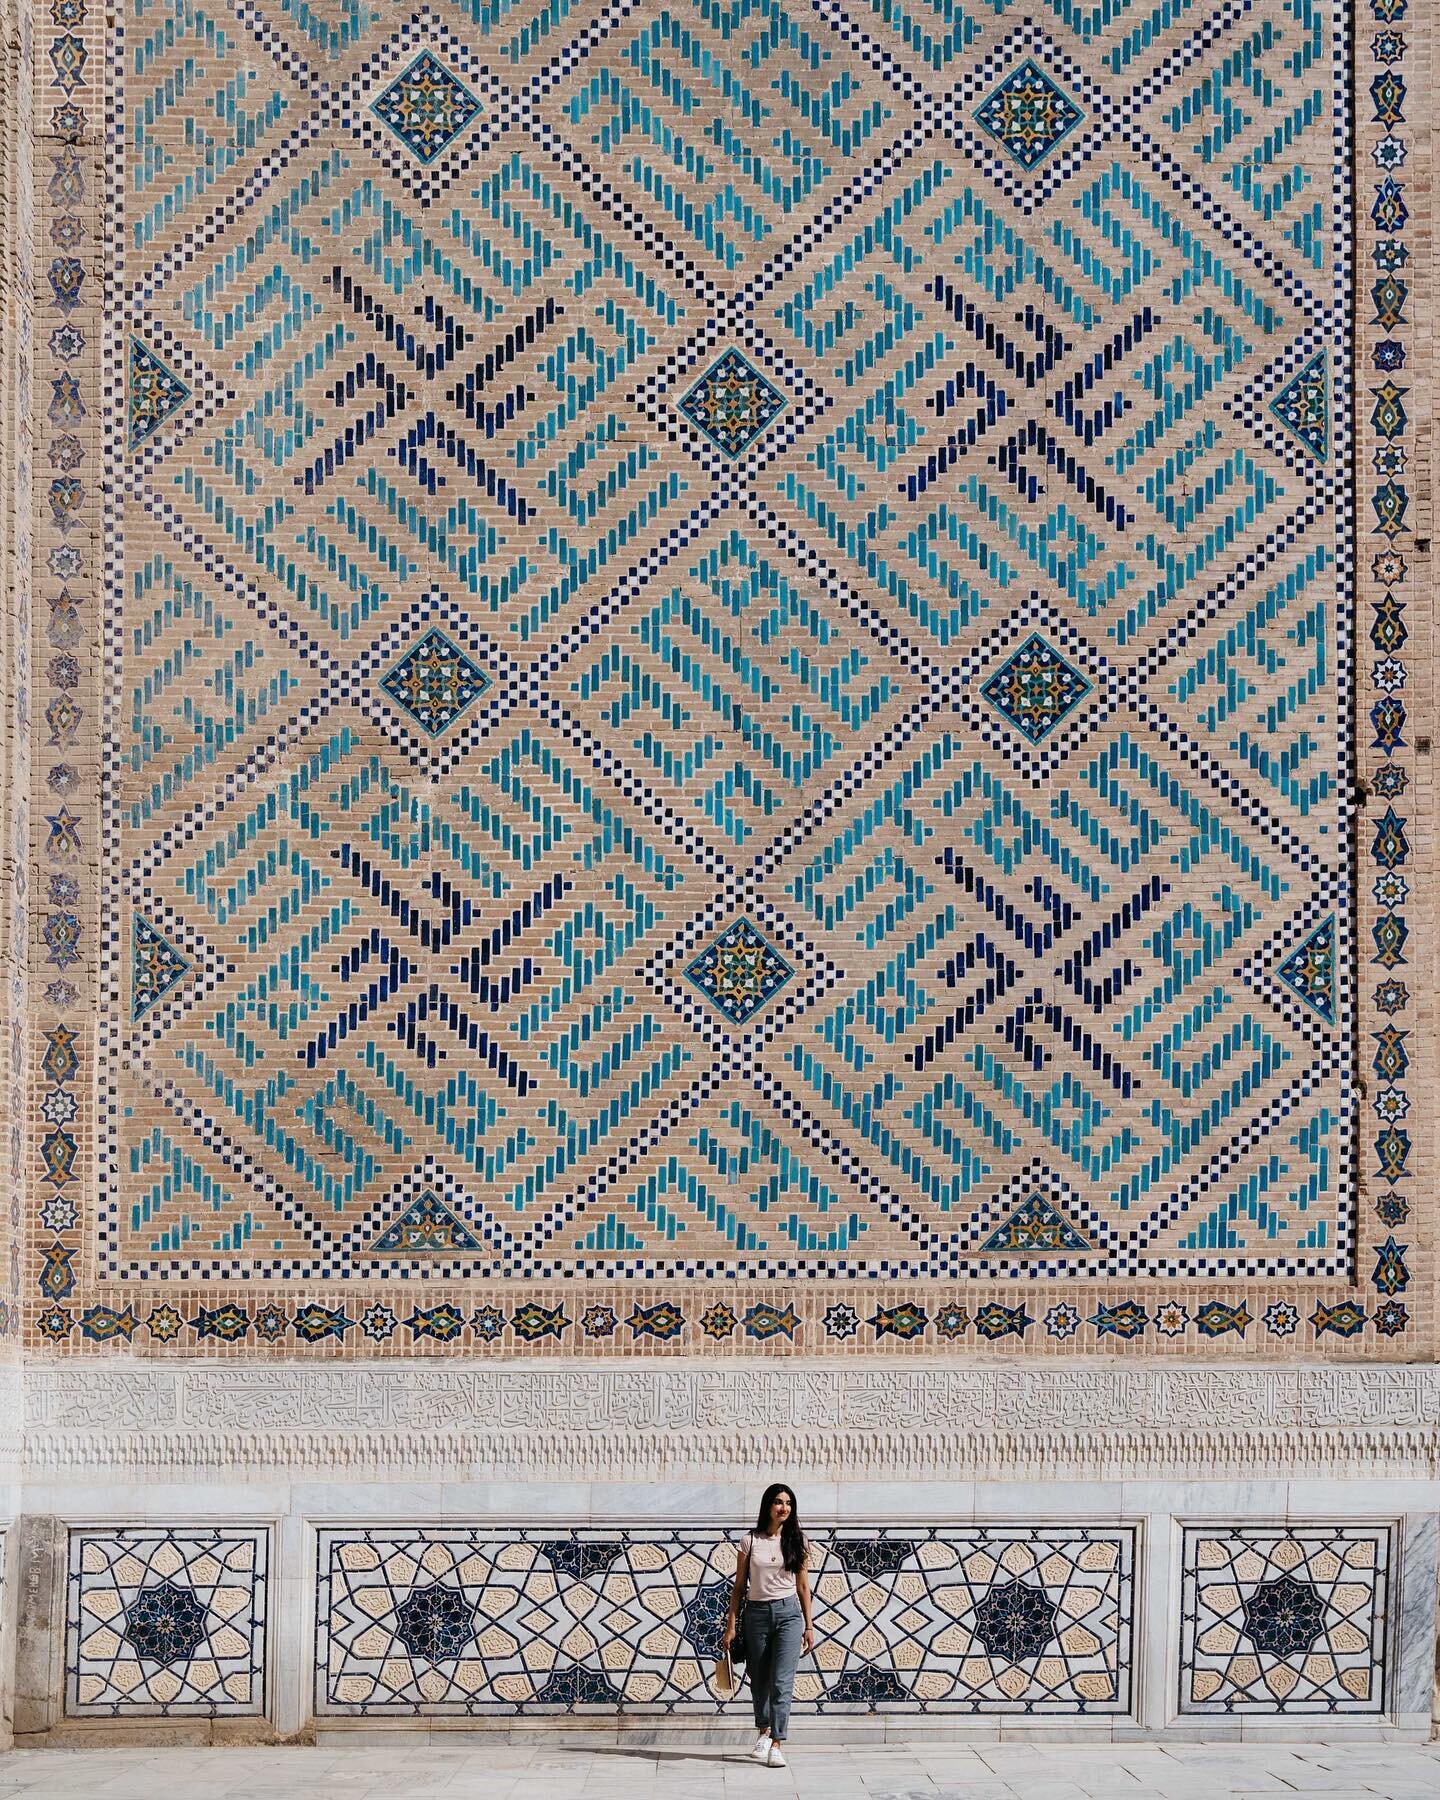 Inside one of the iwan&rsquo;s at the Bibi Khanym Mosque in Samarkand, Uzbekistan. This photo features in my new exhibition &lsquo;The Silk Road: A Living History&rsquo; in London&rsquo;s King&rsquo;s Cross. Presented by @akf_uk. 

Link in my bio for